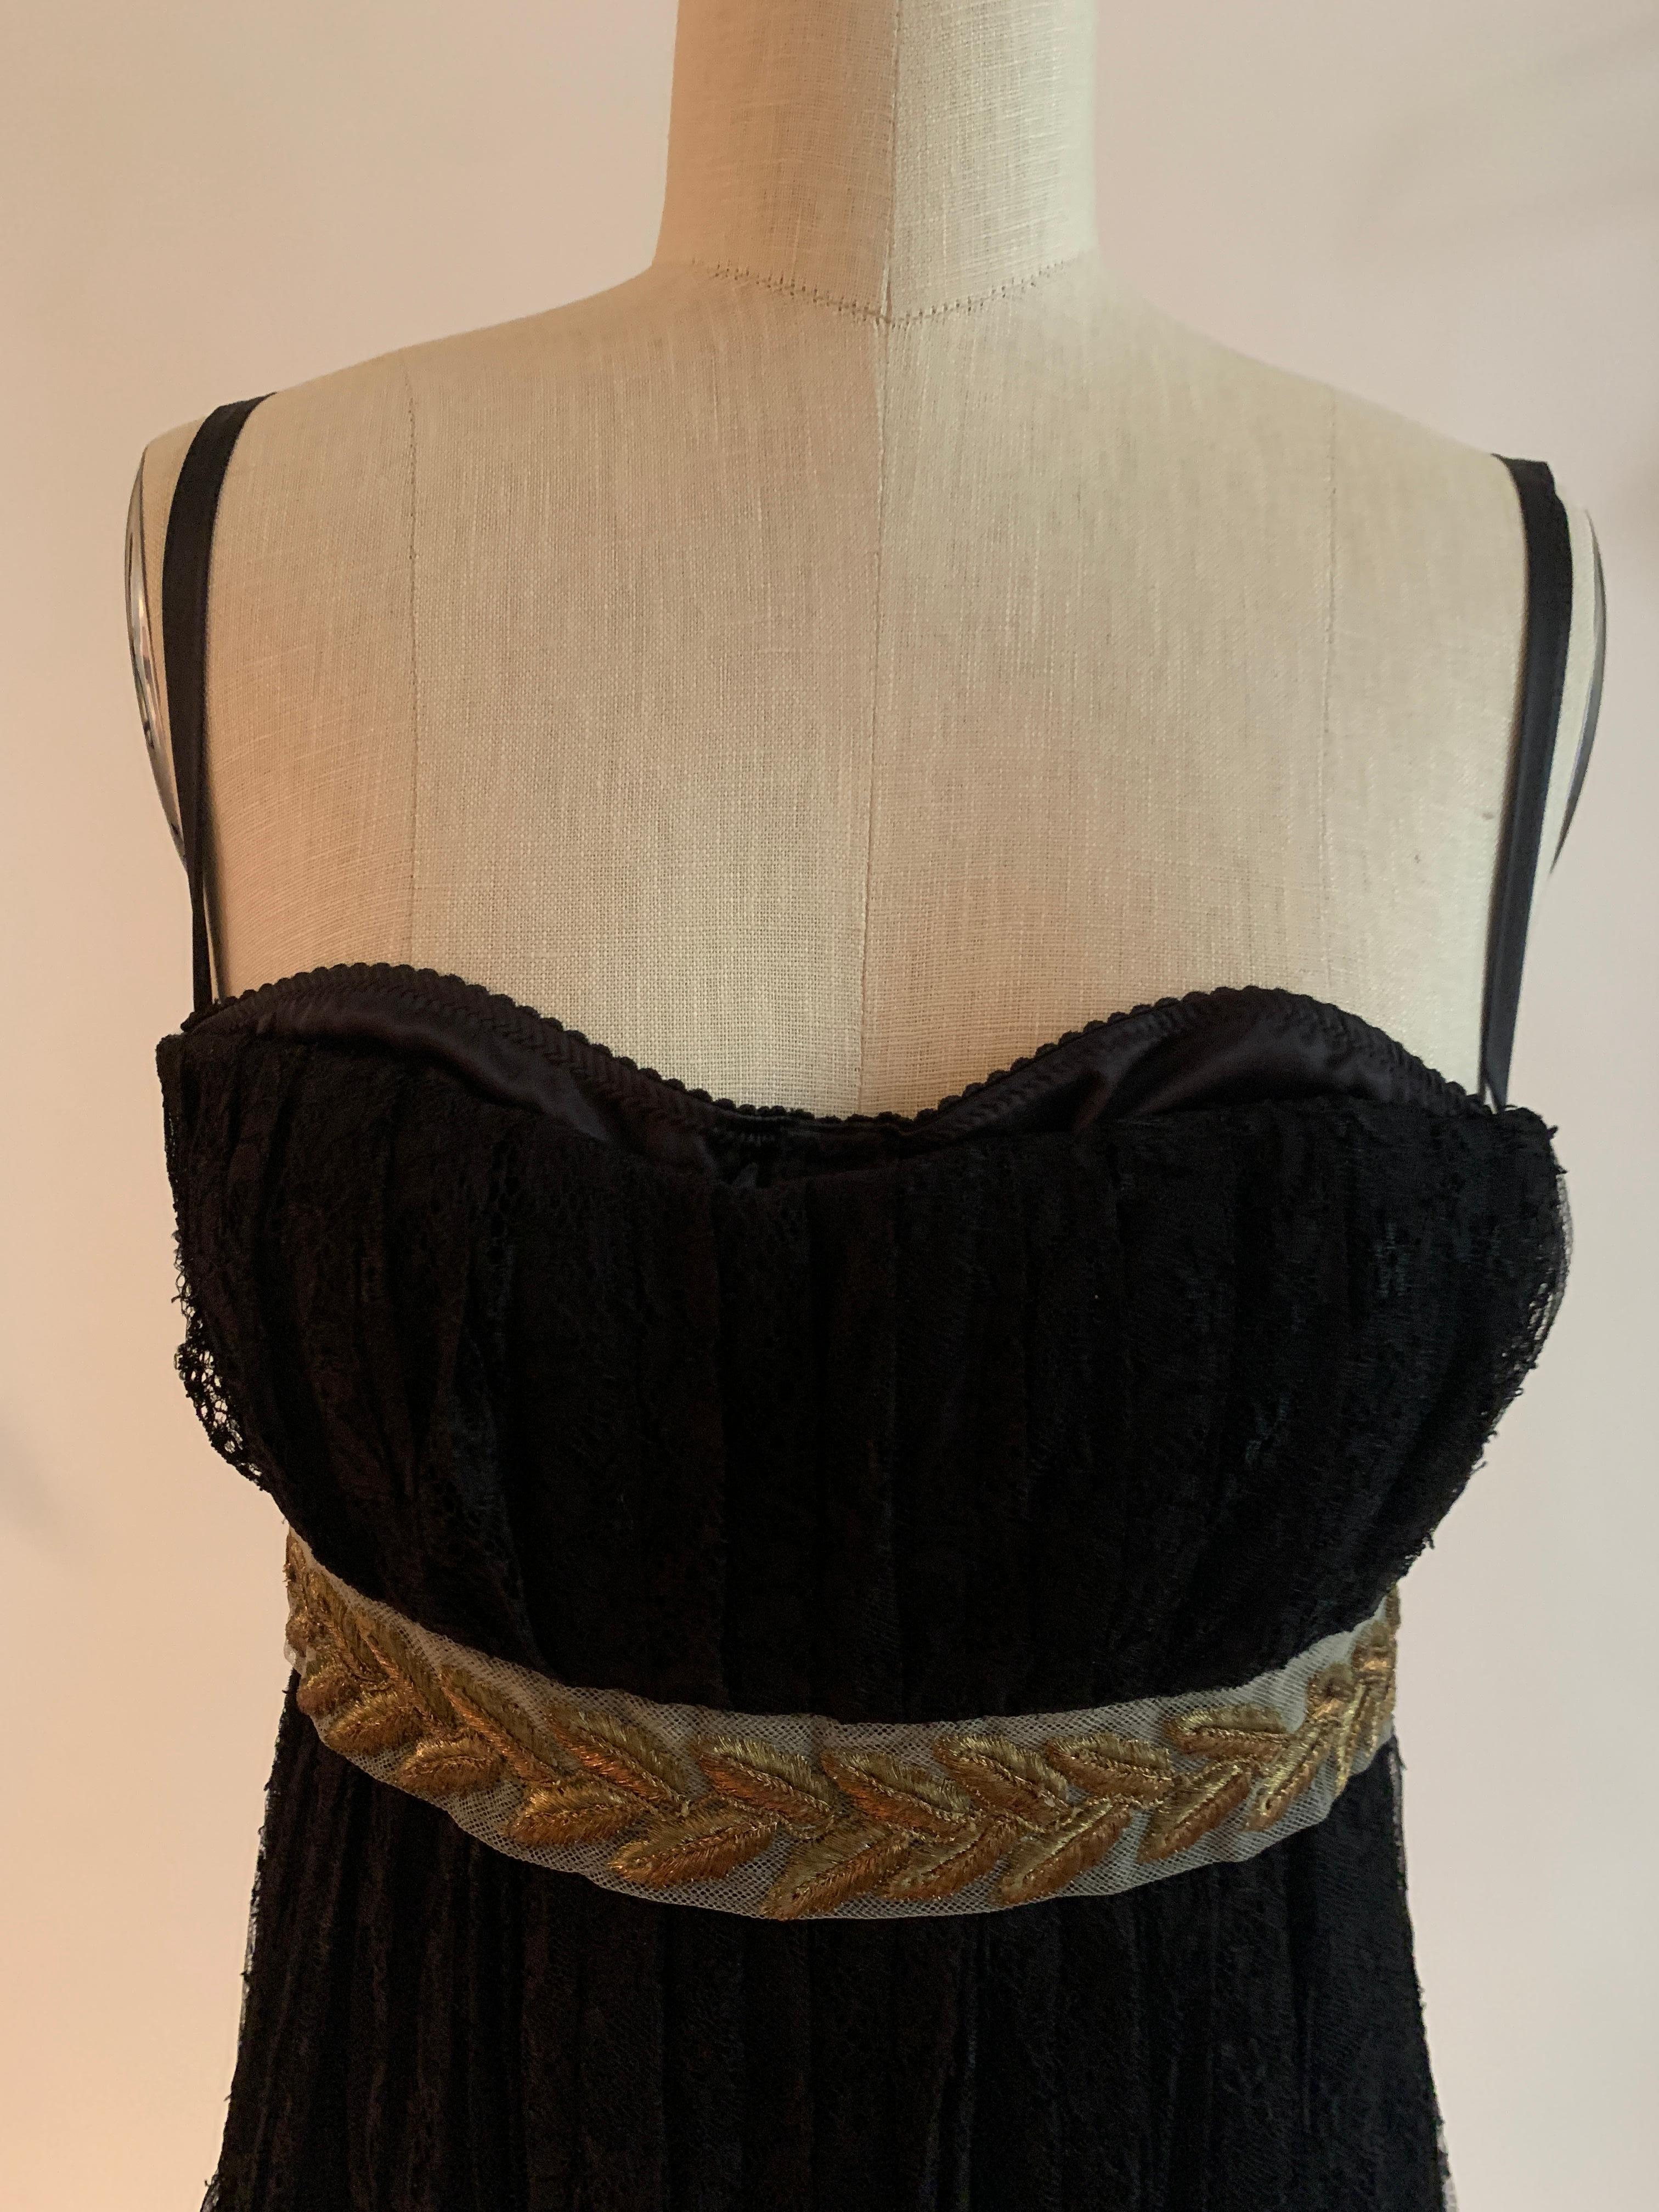 Dolce and Gabbana Unworn 2006 Black Lace Dress with Gold Laurel Trim Ad Campaign In Excellent Condition For Sale In San Francisco, CA